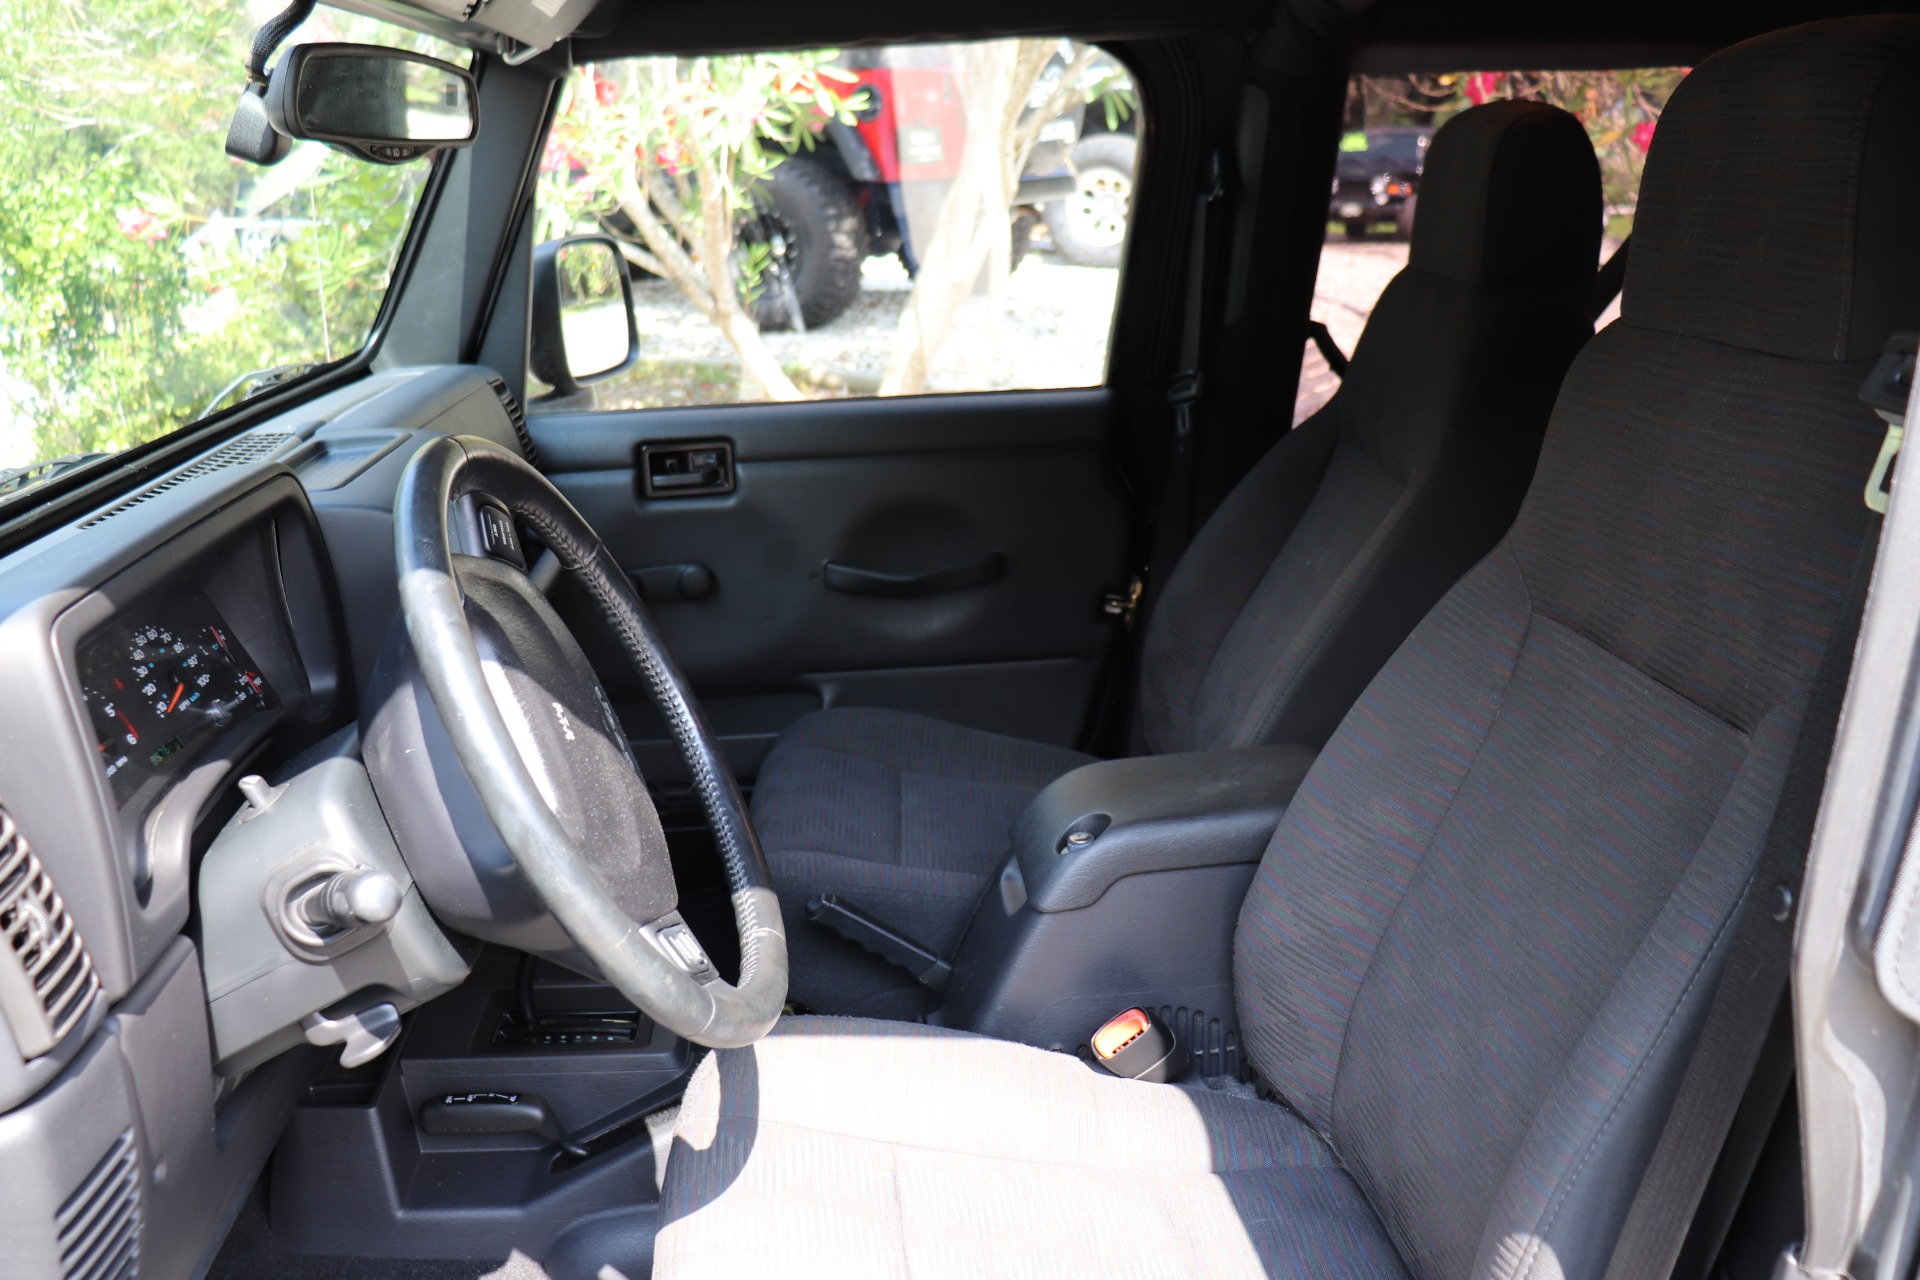 Used 2005 Jeep Wrangler Sport For Sale ($14,995) | Select Jeeps Inc. Stock  #354331